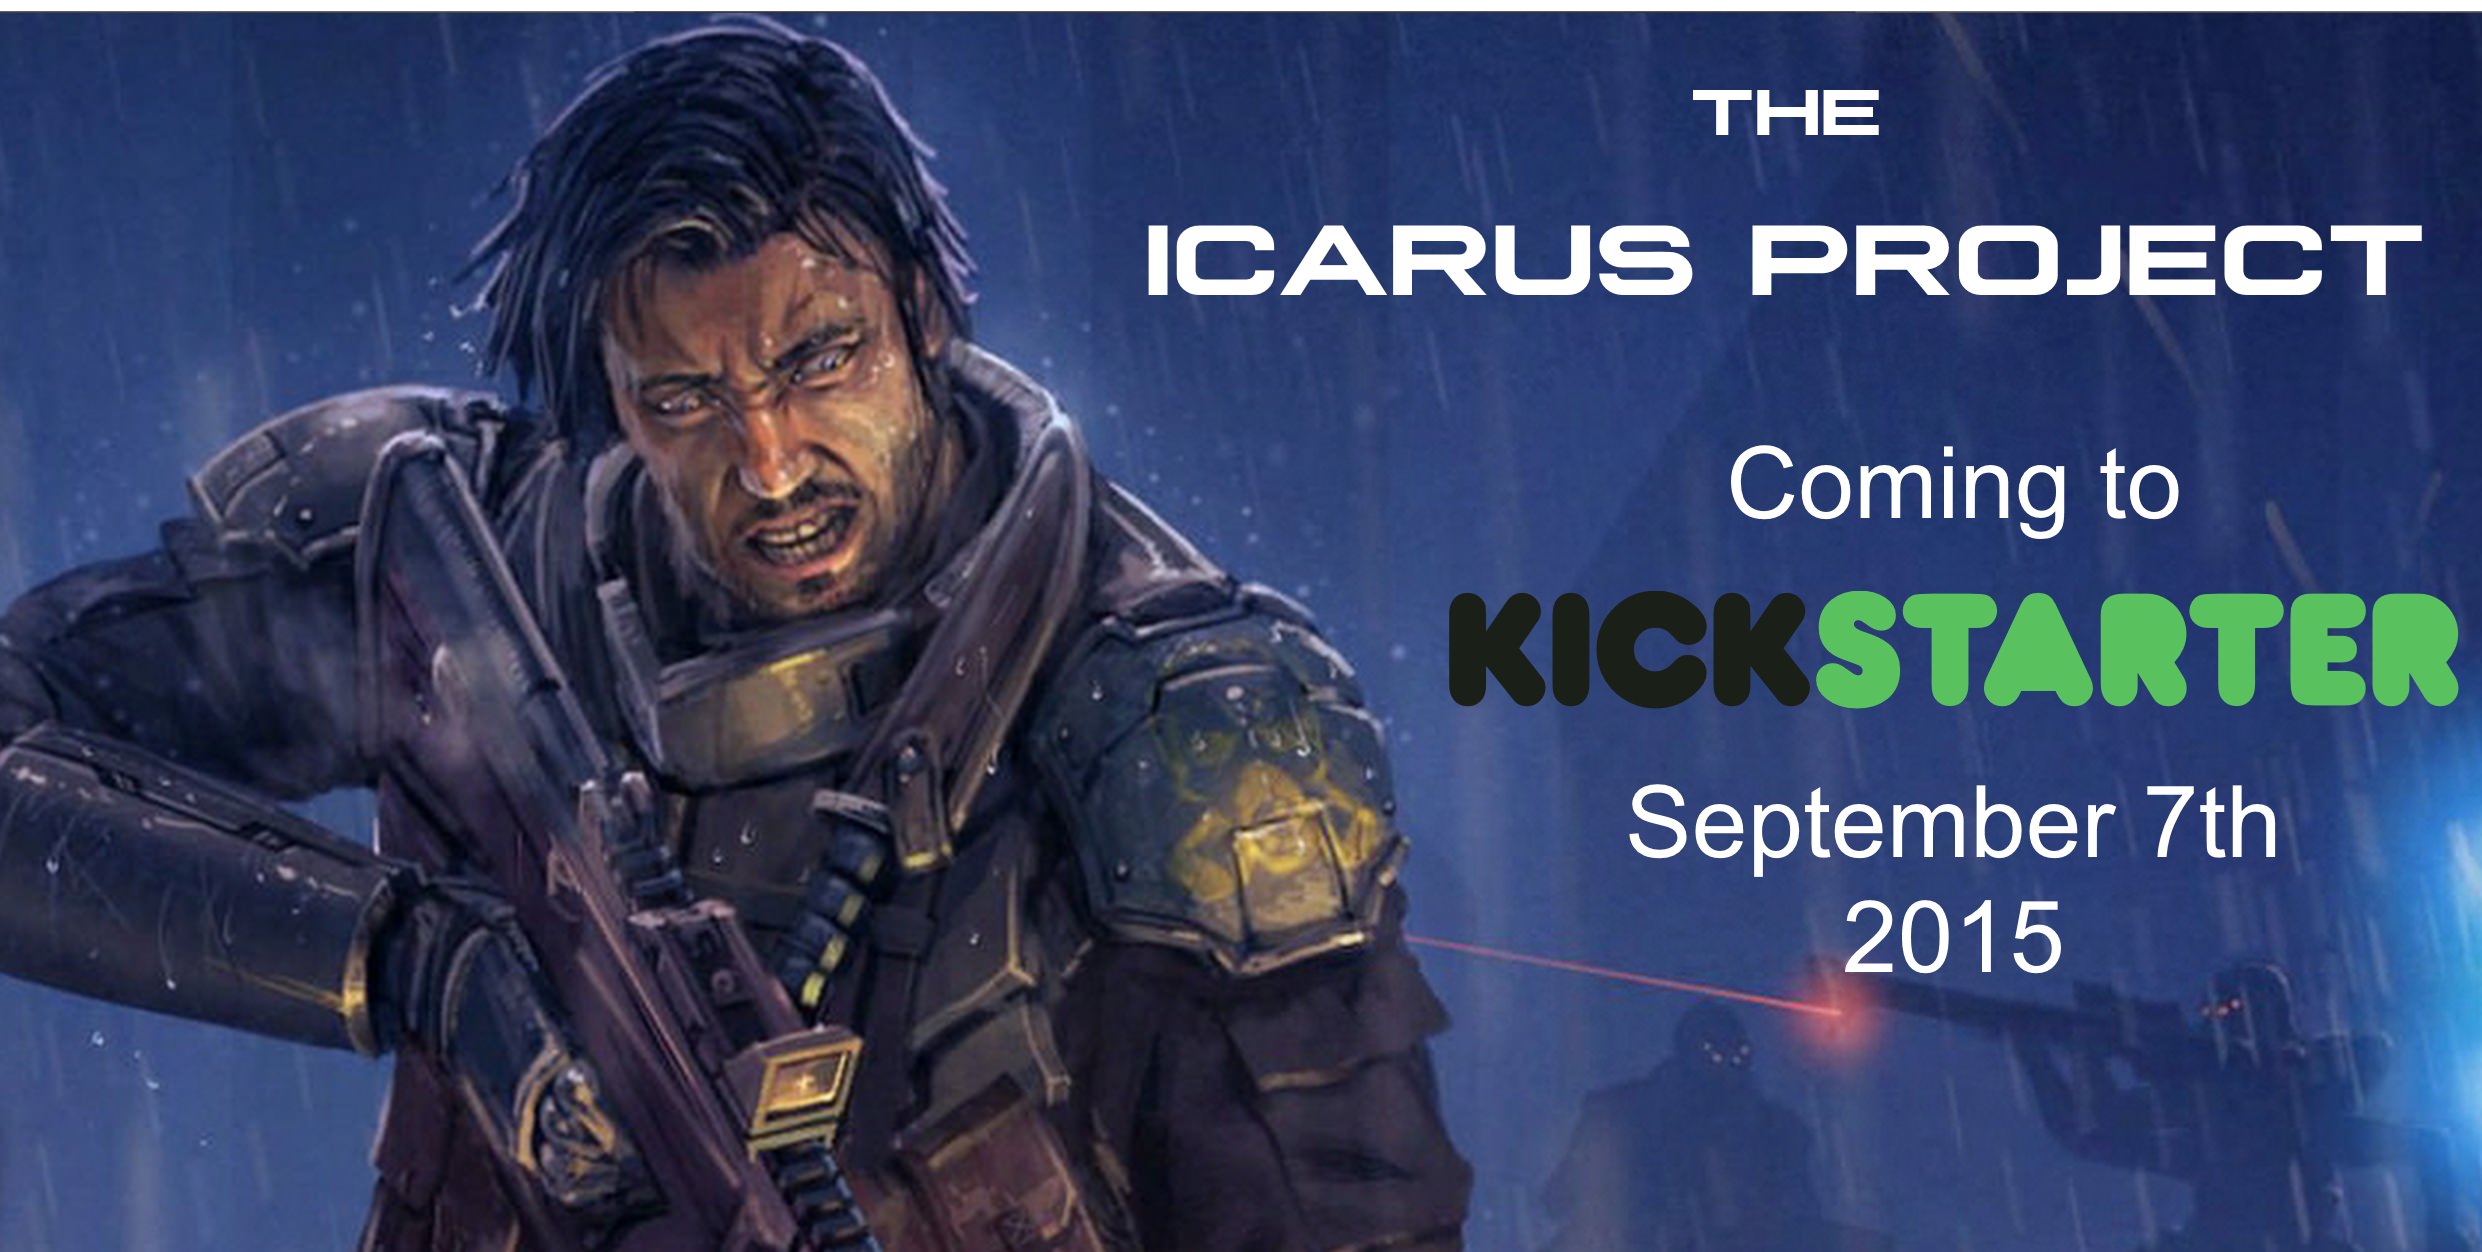 The Icarus Project Kickstarter Begins Next Month!